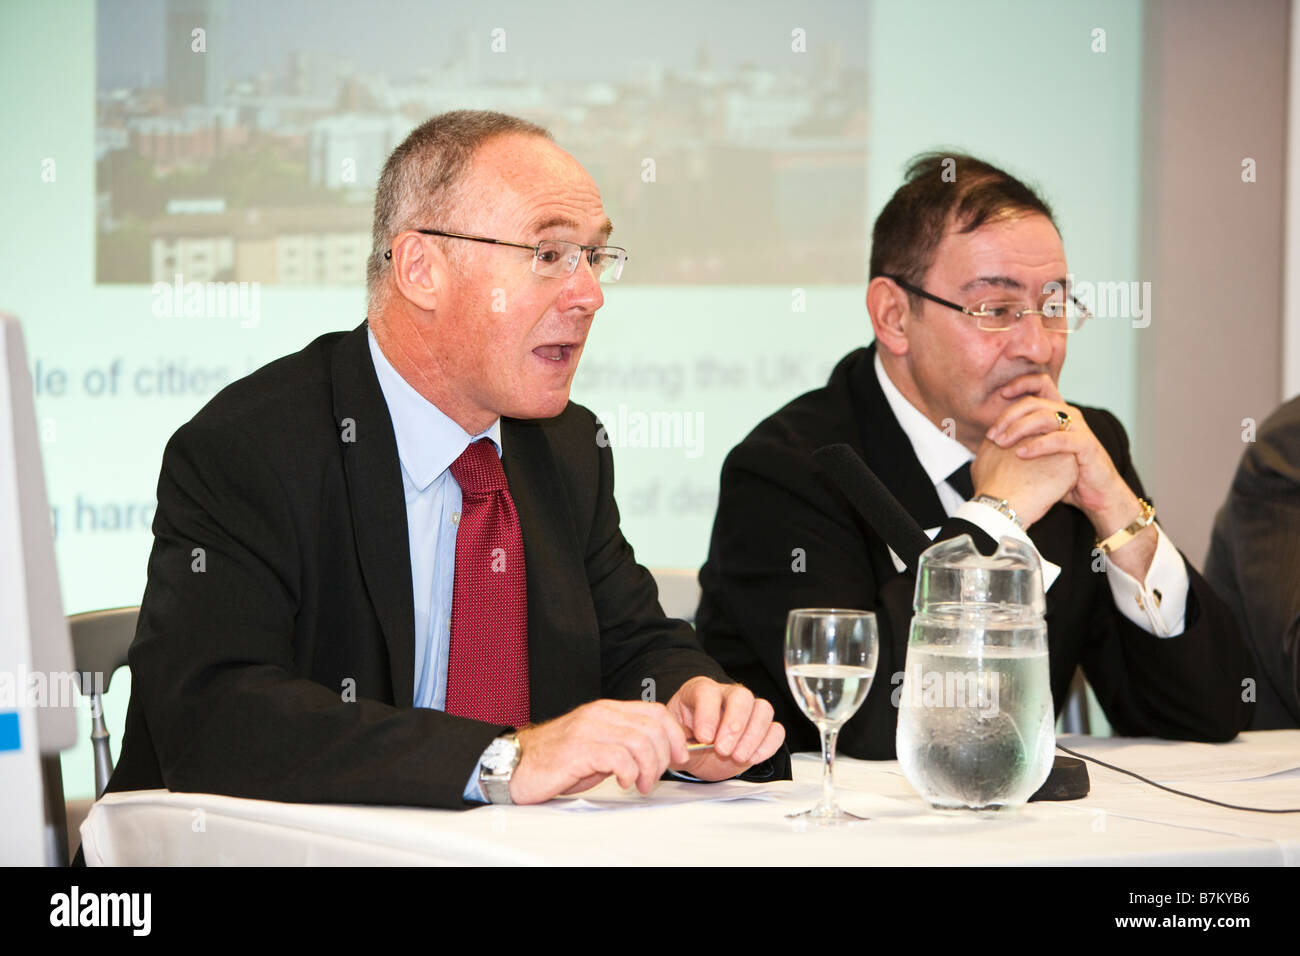 Sir Richard Leese (L) Leader of Manchester City Council and Sir Howard Bernstein (R) CEO of Manchester City Council Stock Photo